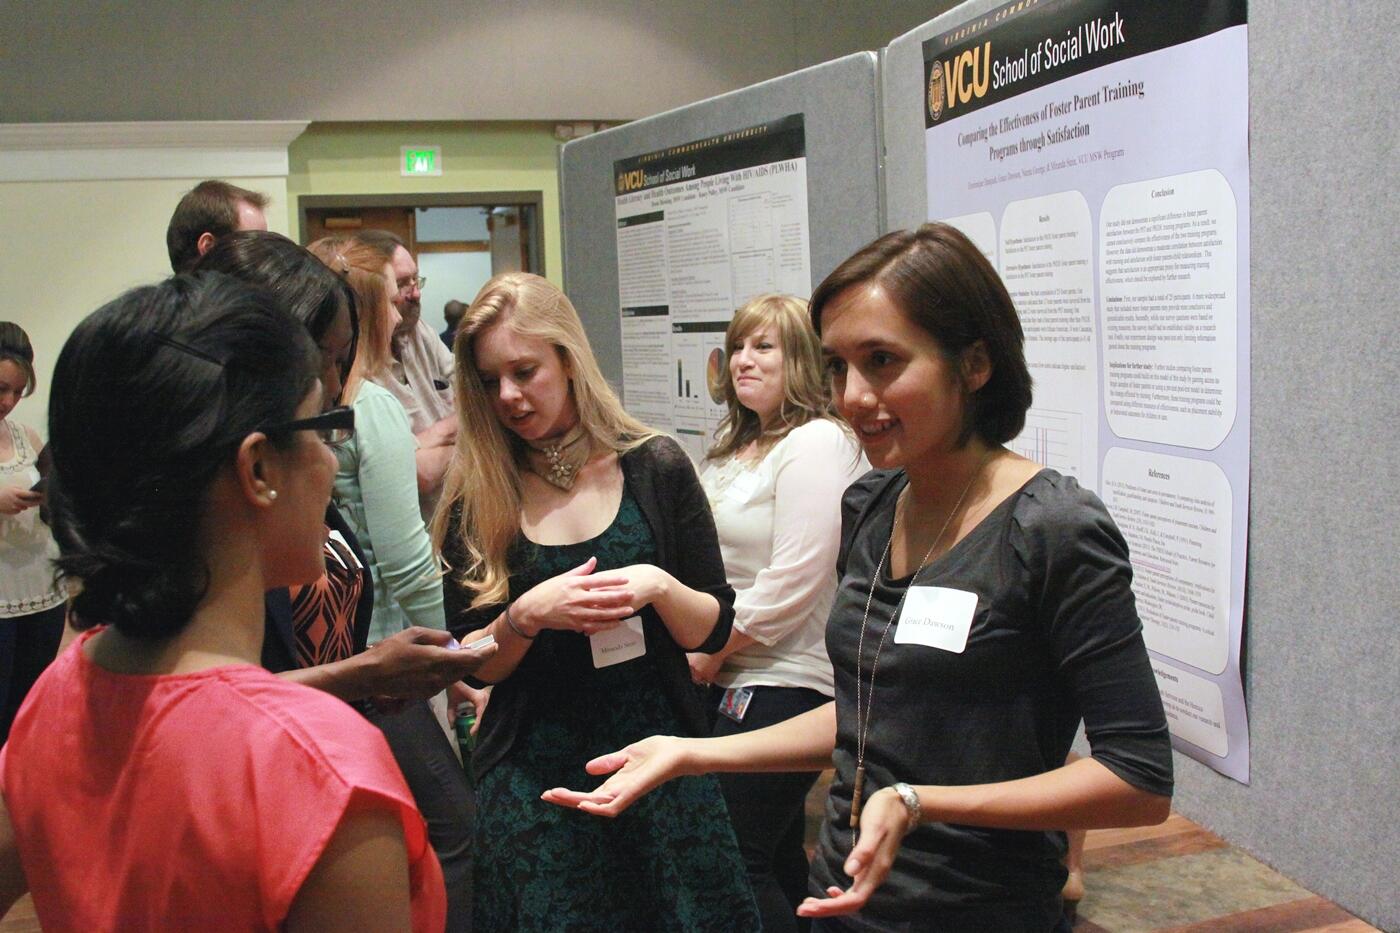 At the School of Social Work Research Symposium in 2014, Grace Dawson discusses her team's research project, “Comparing the Effectiveness of Foster Parent Training Programs Through Satisfaction.”

